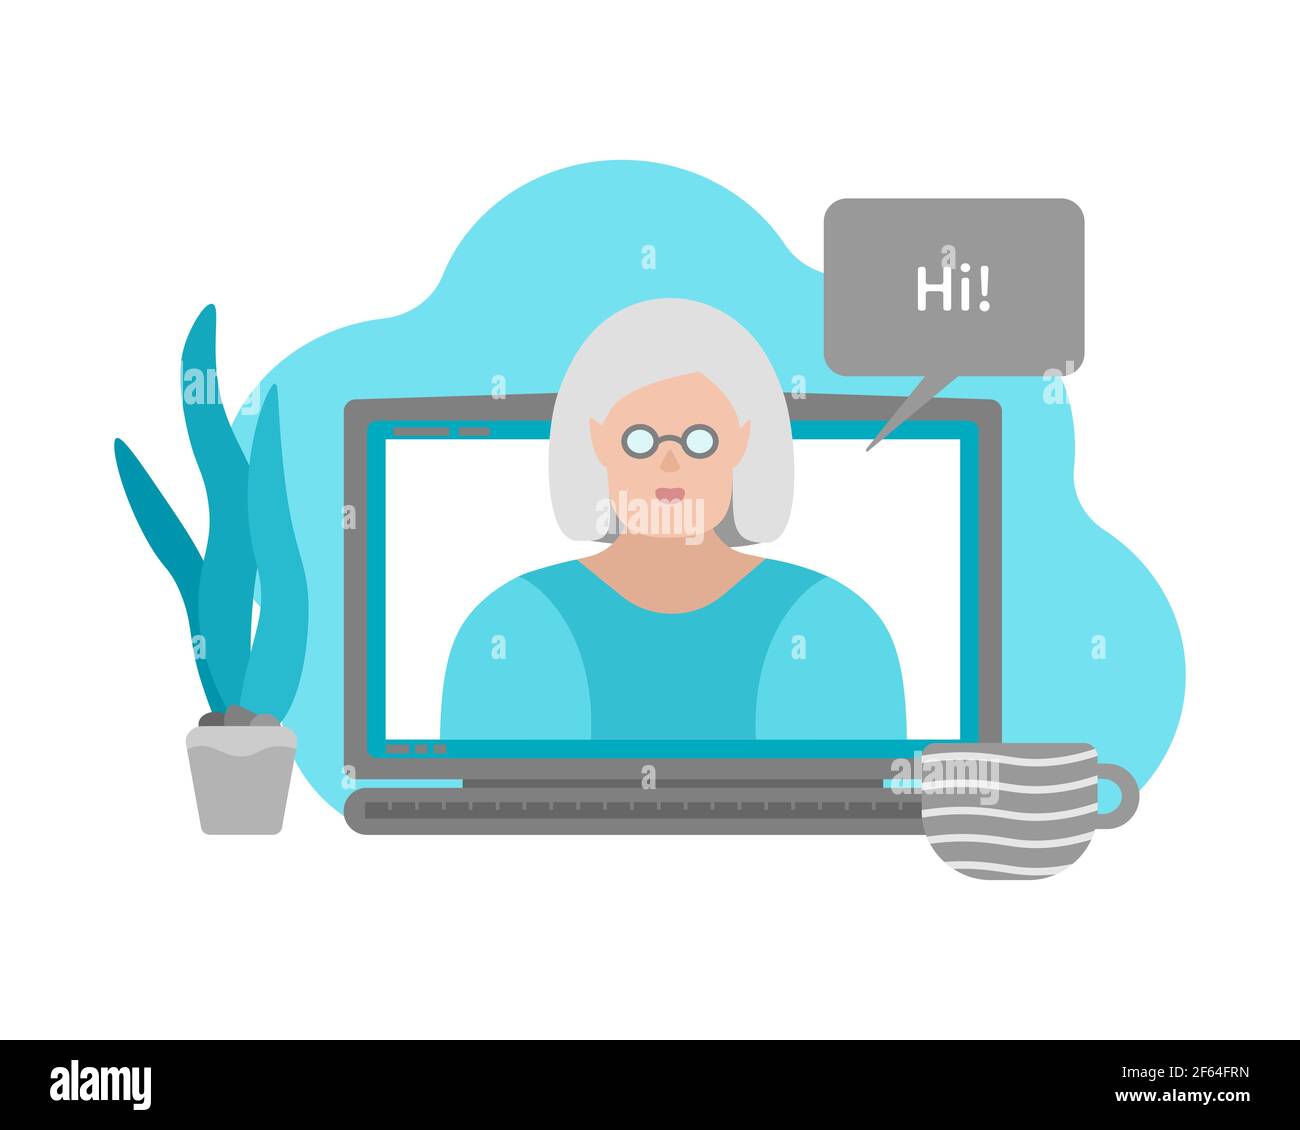 Vector isolated illustration with display of laptop and elderly woman on screen. Online chat with family and friends, or find love on dating sites Stock Vector